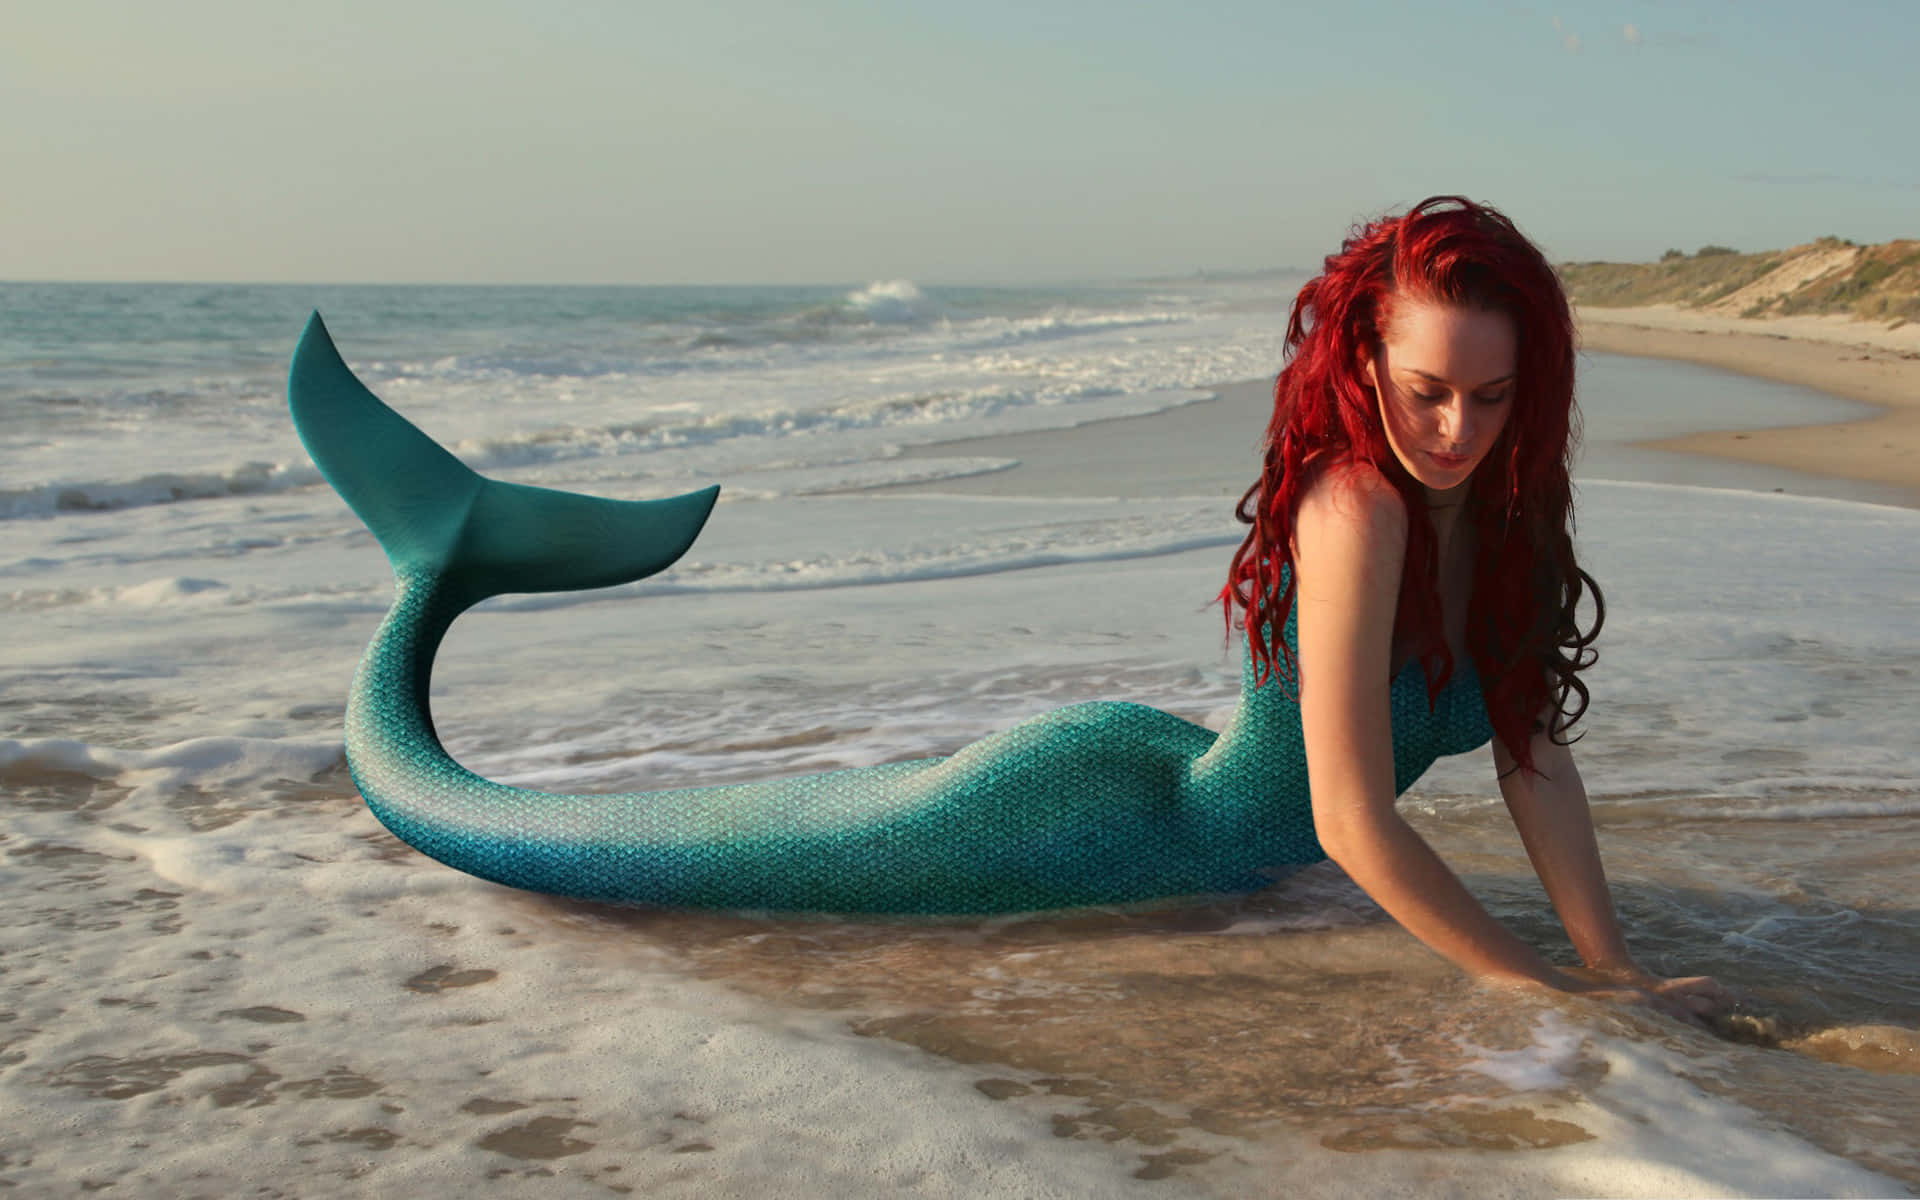 A delightful moment with a real mermaid